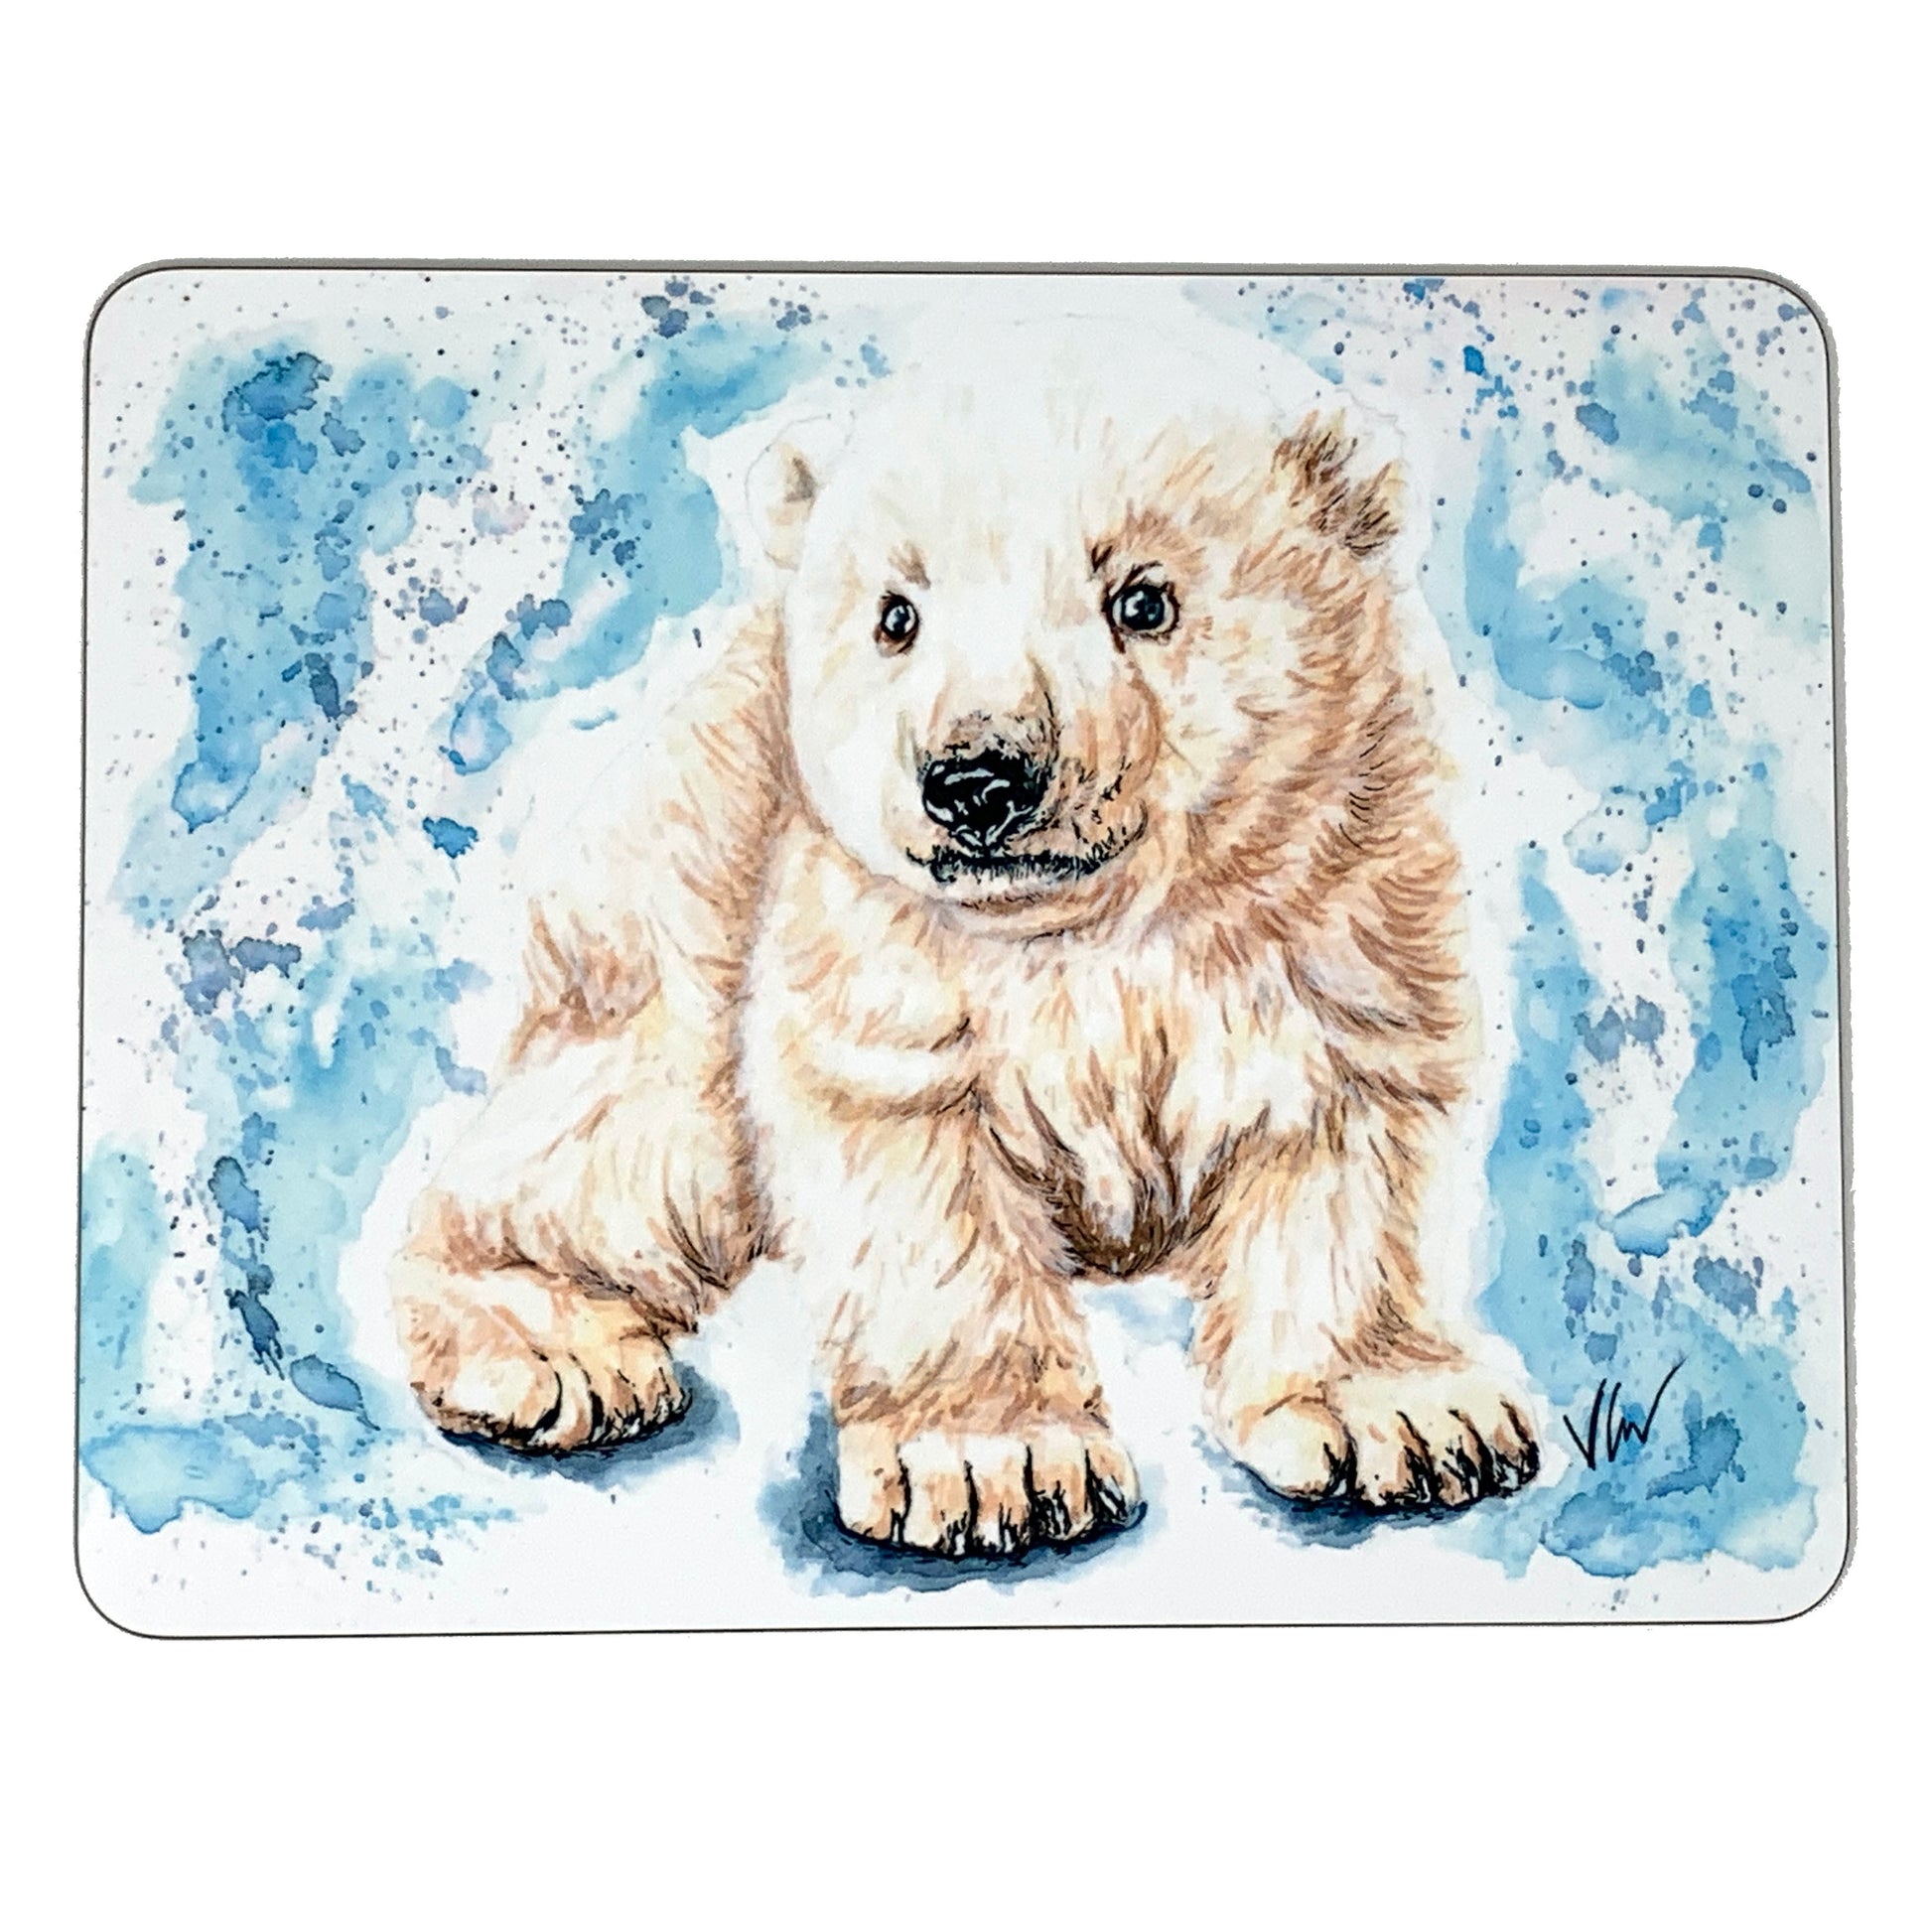 These lovely Brodie the Polar Bear Cub placemats by Victoria Gordon are perfect to brighten up any table!   Each glossy placemat has a hard back and is heat resistant to 100°C. They are also easily wiped clean.   Dimensions: 26 x 20cm  Handmade by Victoria in her home workshop.  Weight: 160g